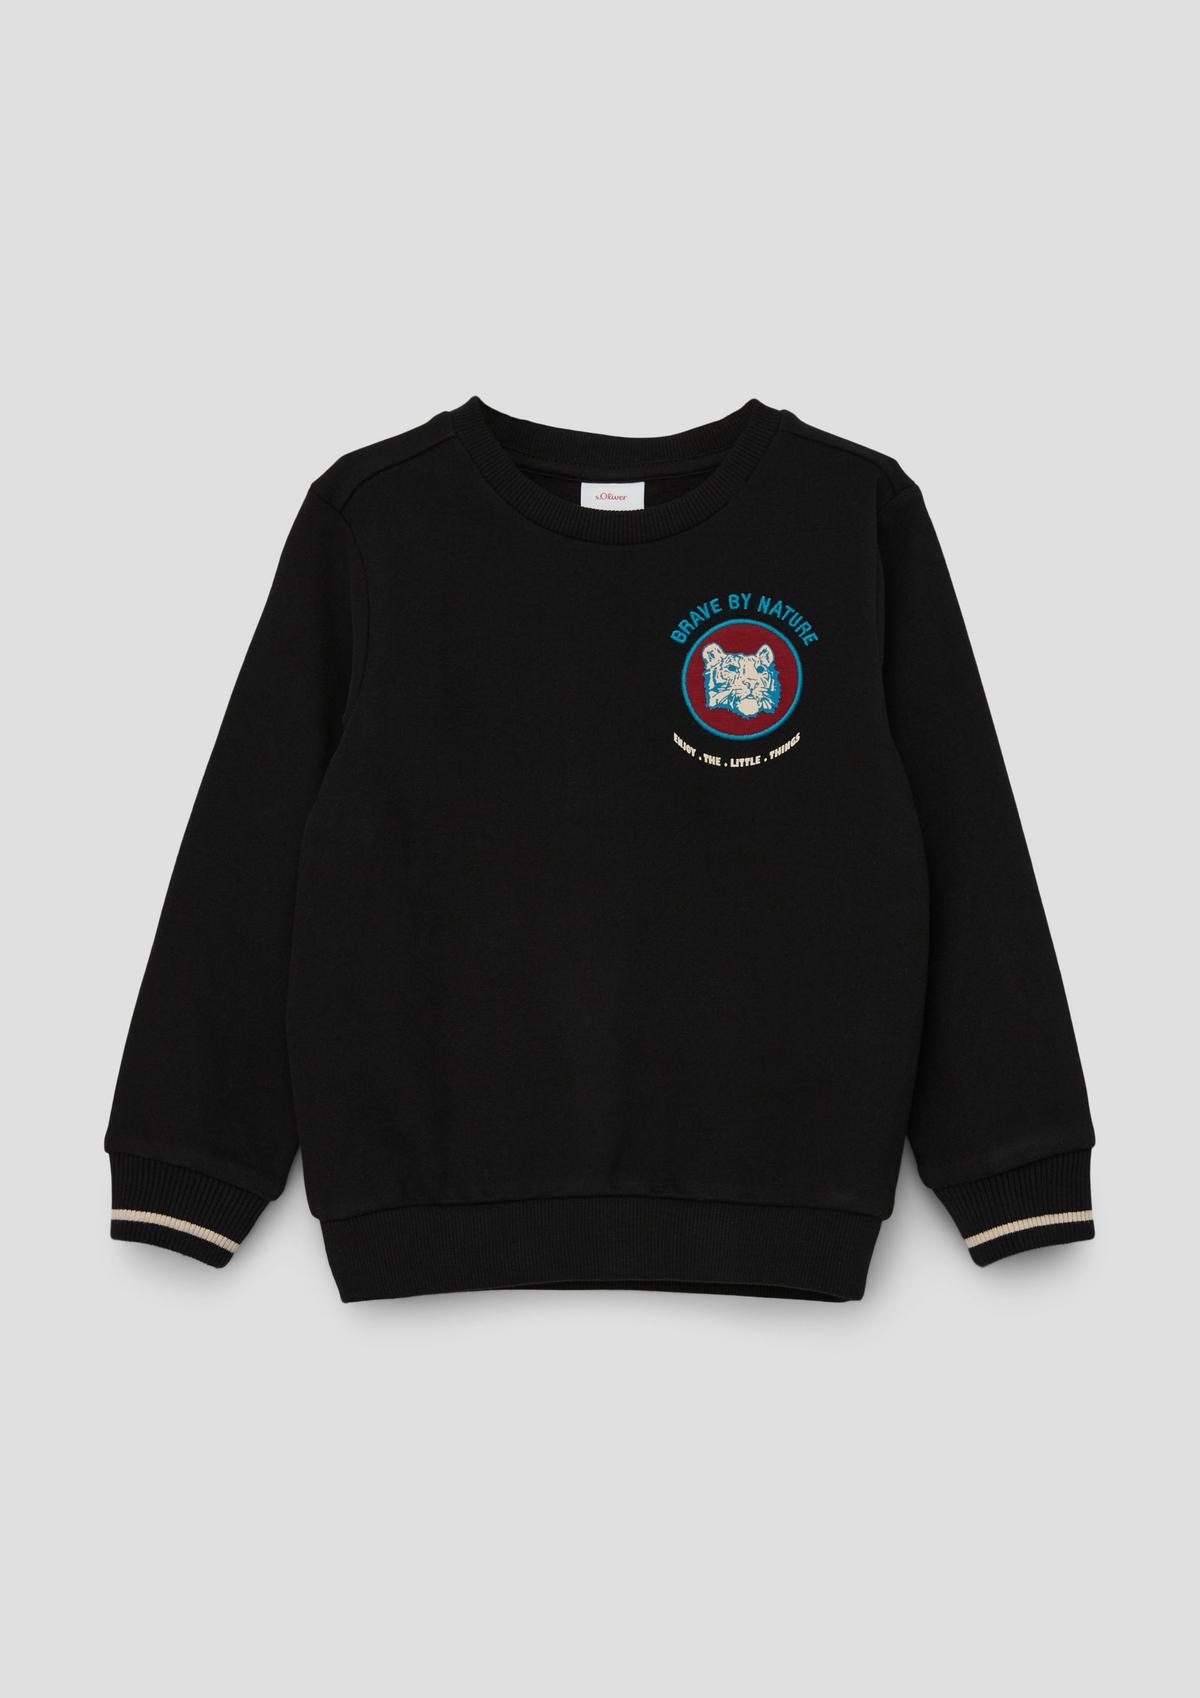 Sweatshirts and knitwear boys for online